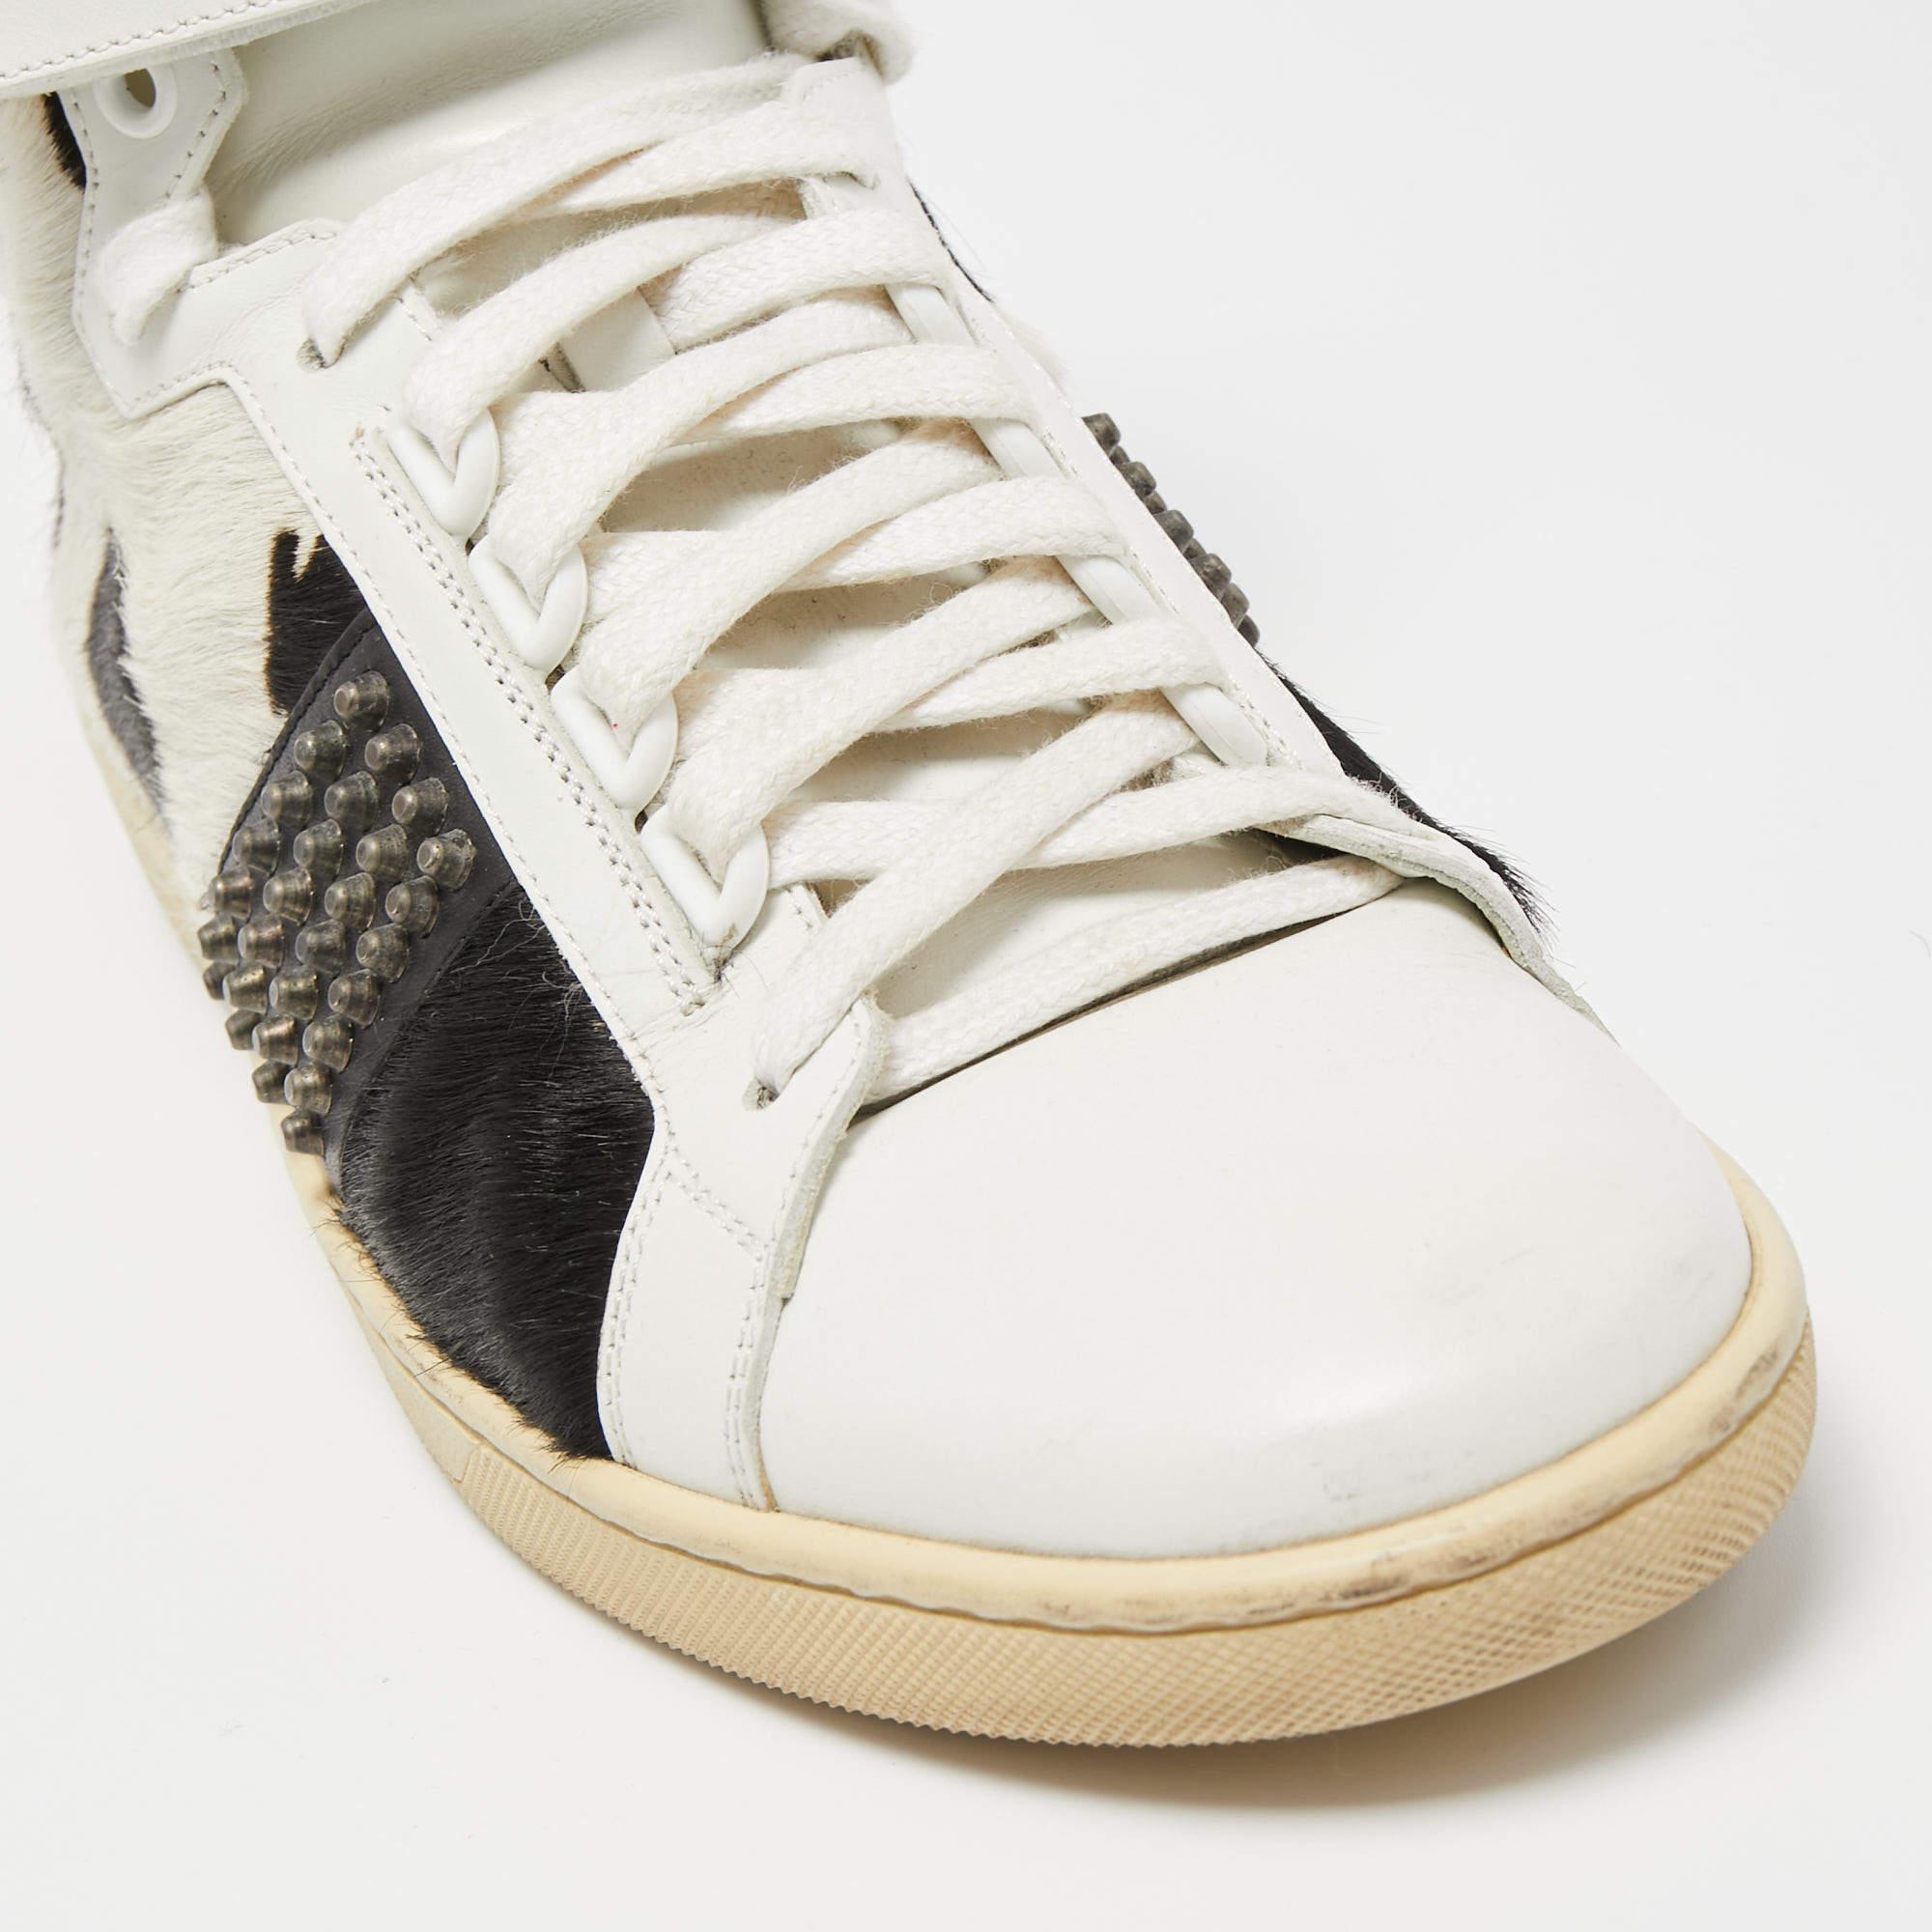 Add a statement appeal to your outfit with these Saint Laurent sneakers. Made from premium materials, they feature lace-up vamps, stud details, and relaxing footbeds.

Includes: Original Dustbag